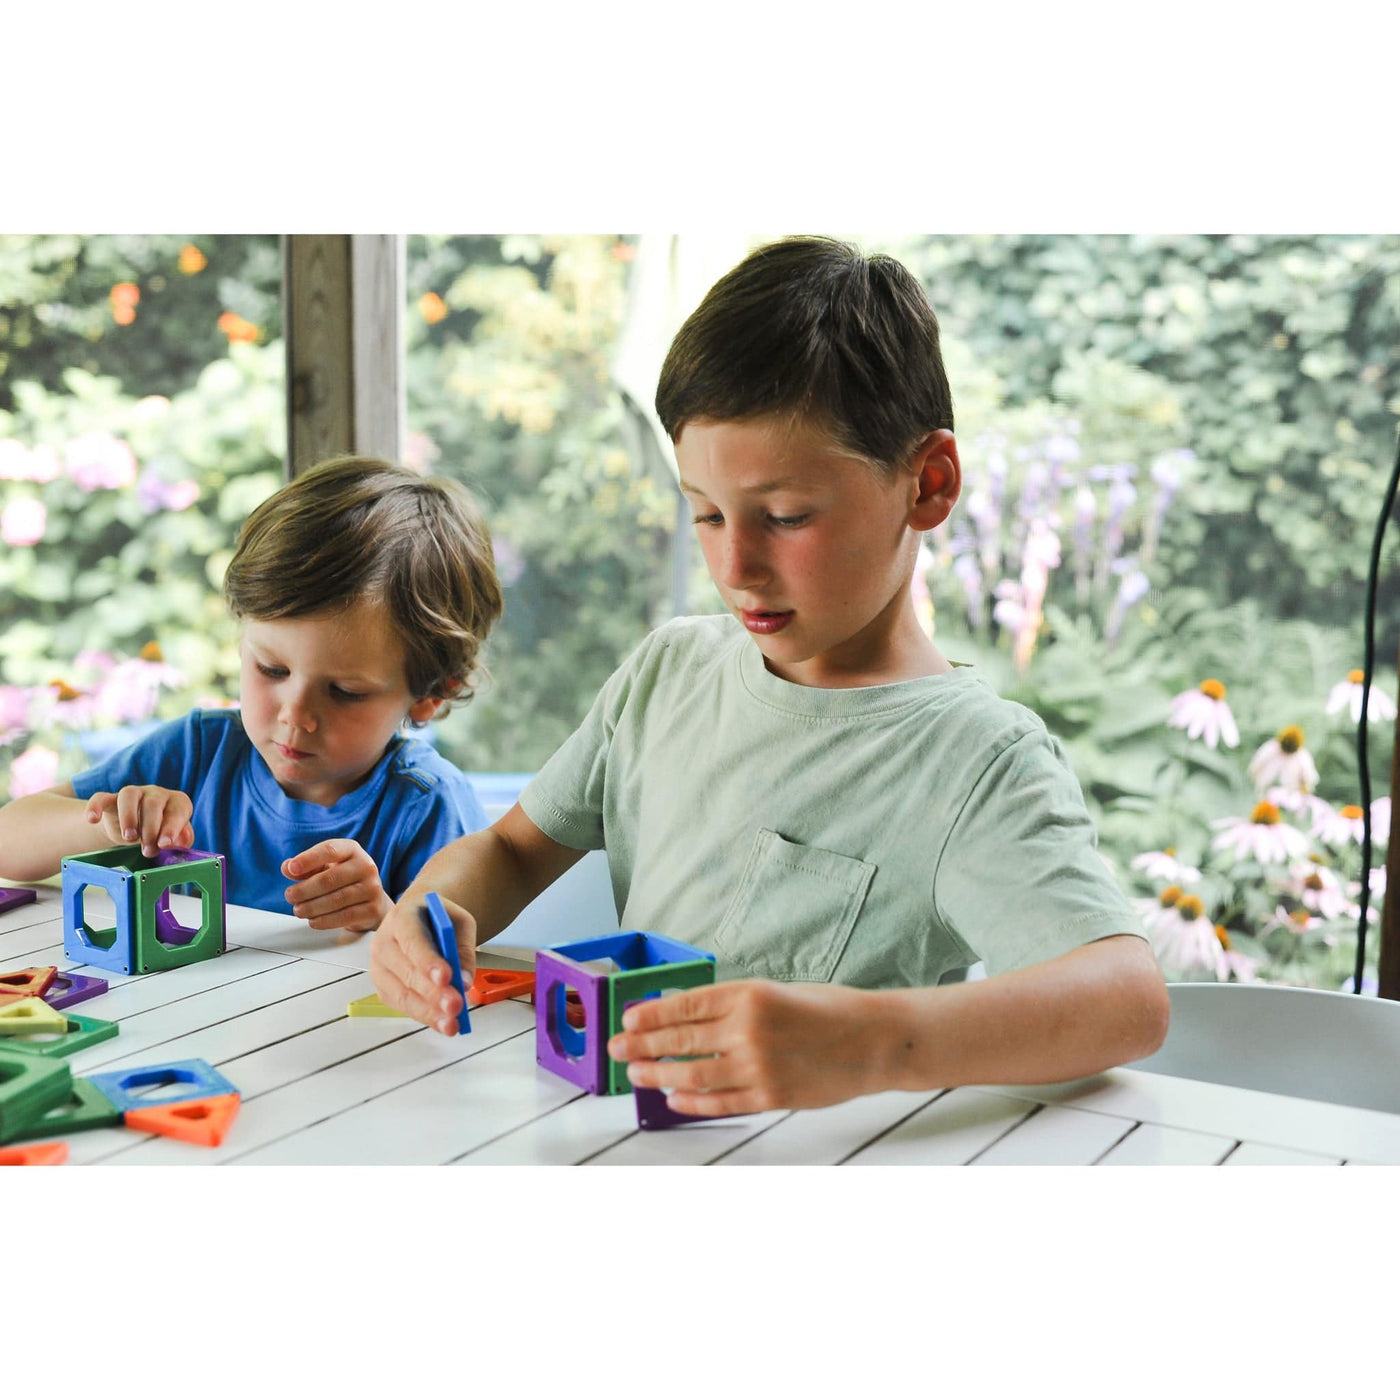 CONNECTIX MAGNETIC TILES CONSTRUCTION BUILDING TILES - Discovery Toys